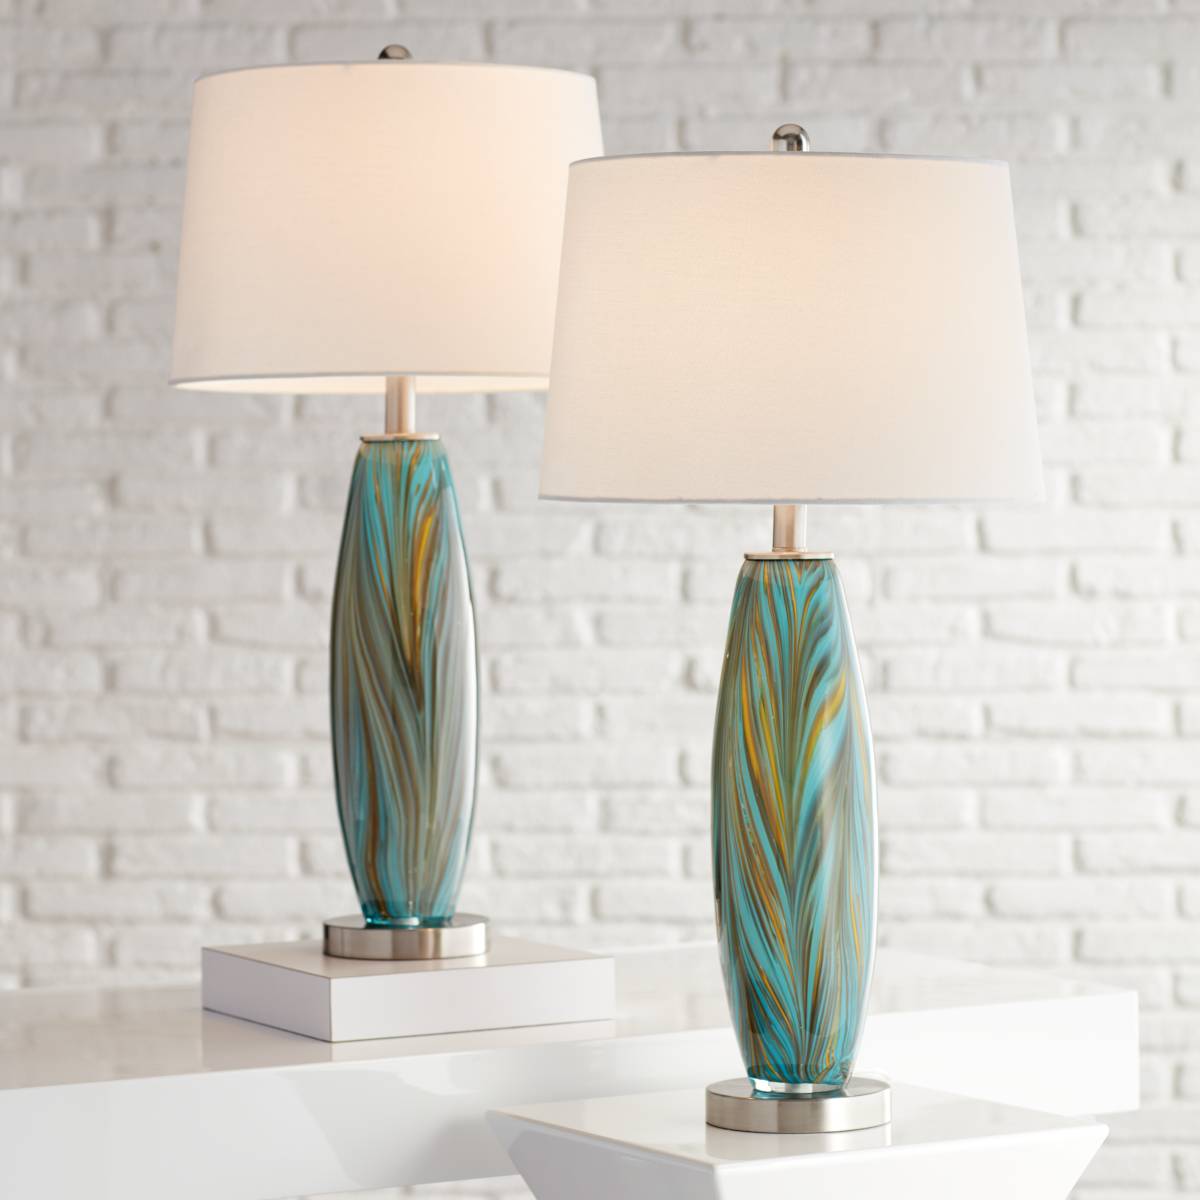 Blue Table Lamps Plus, Navy Blue Table Lamps For Living Room